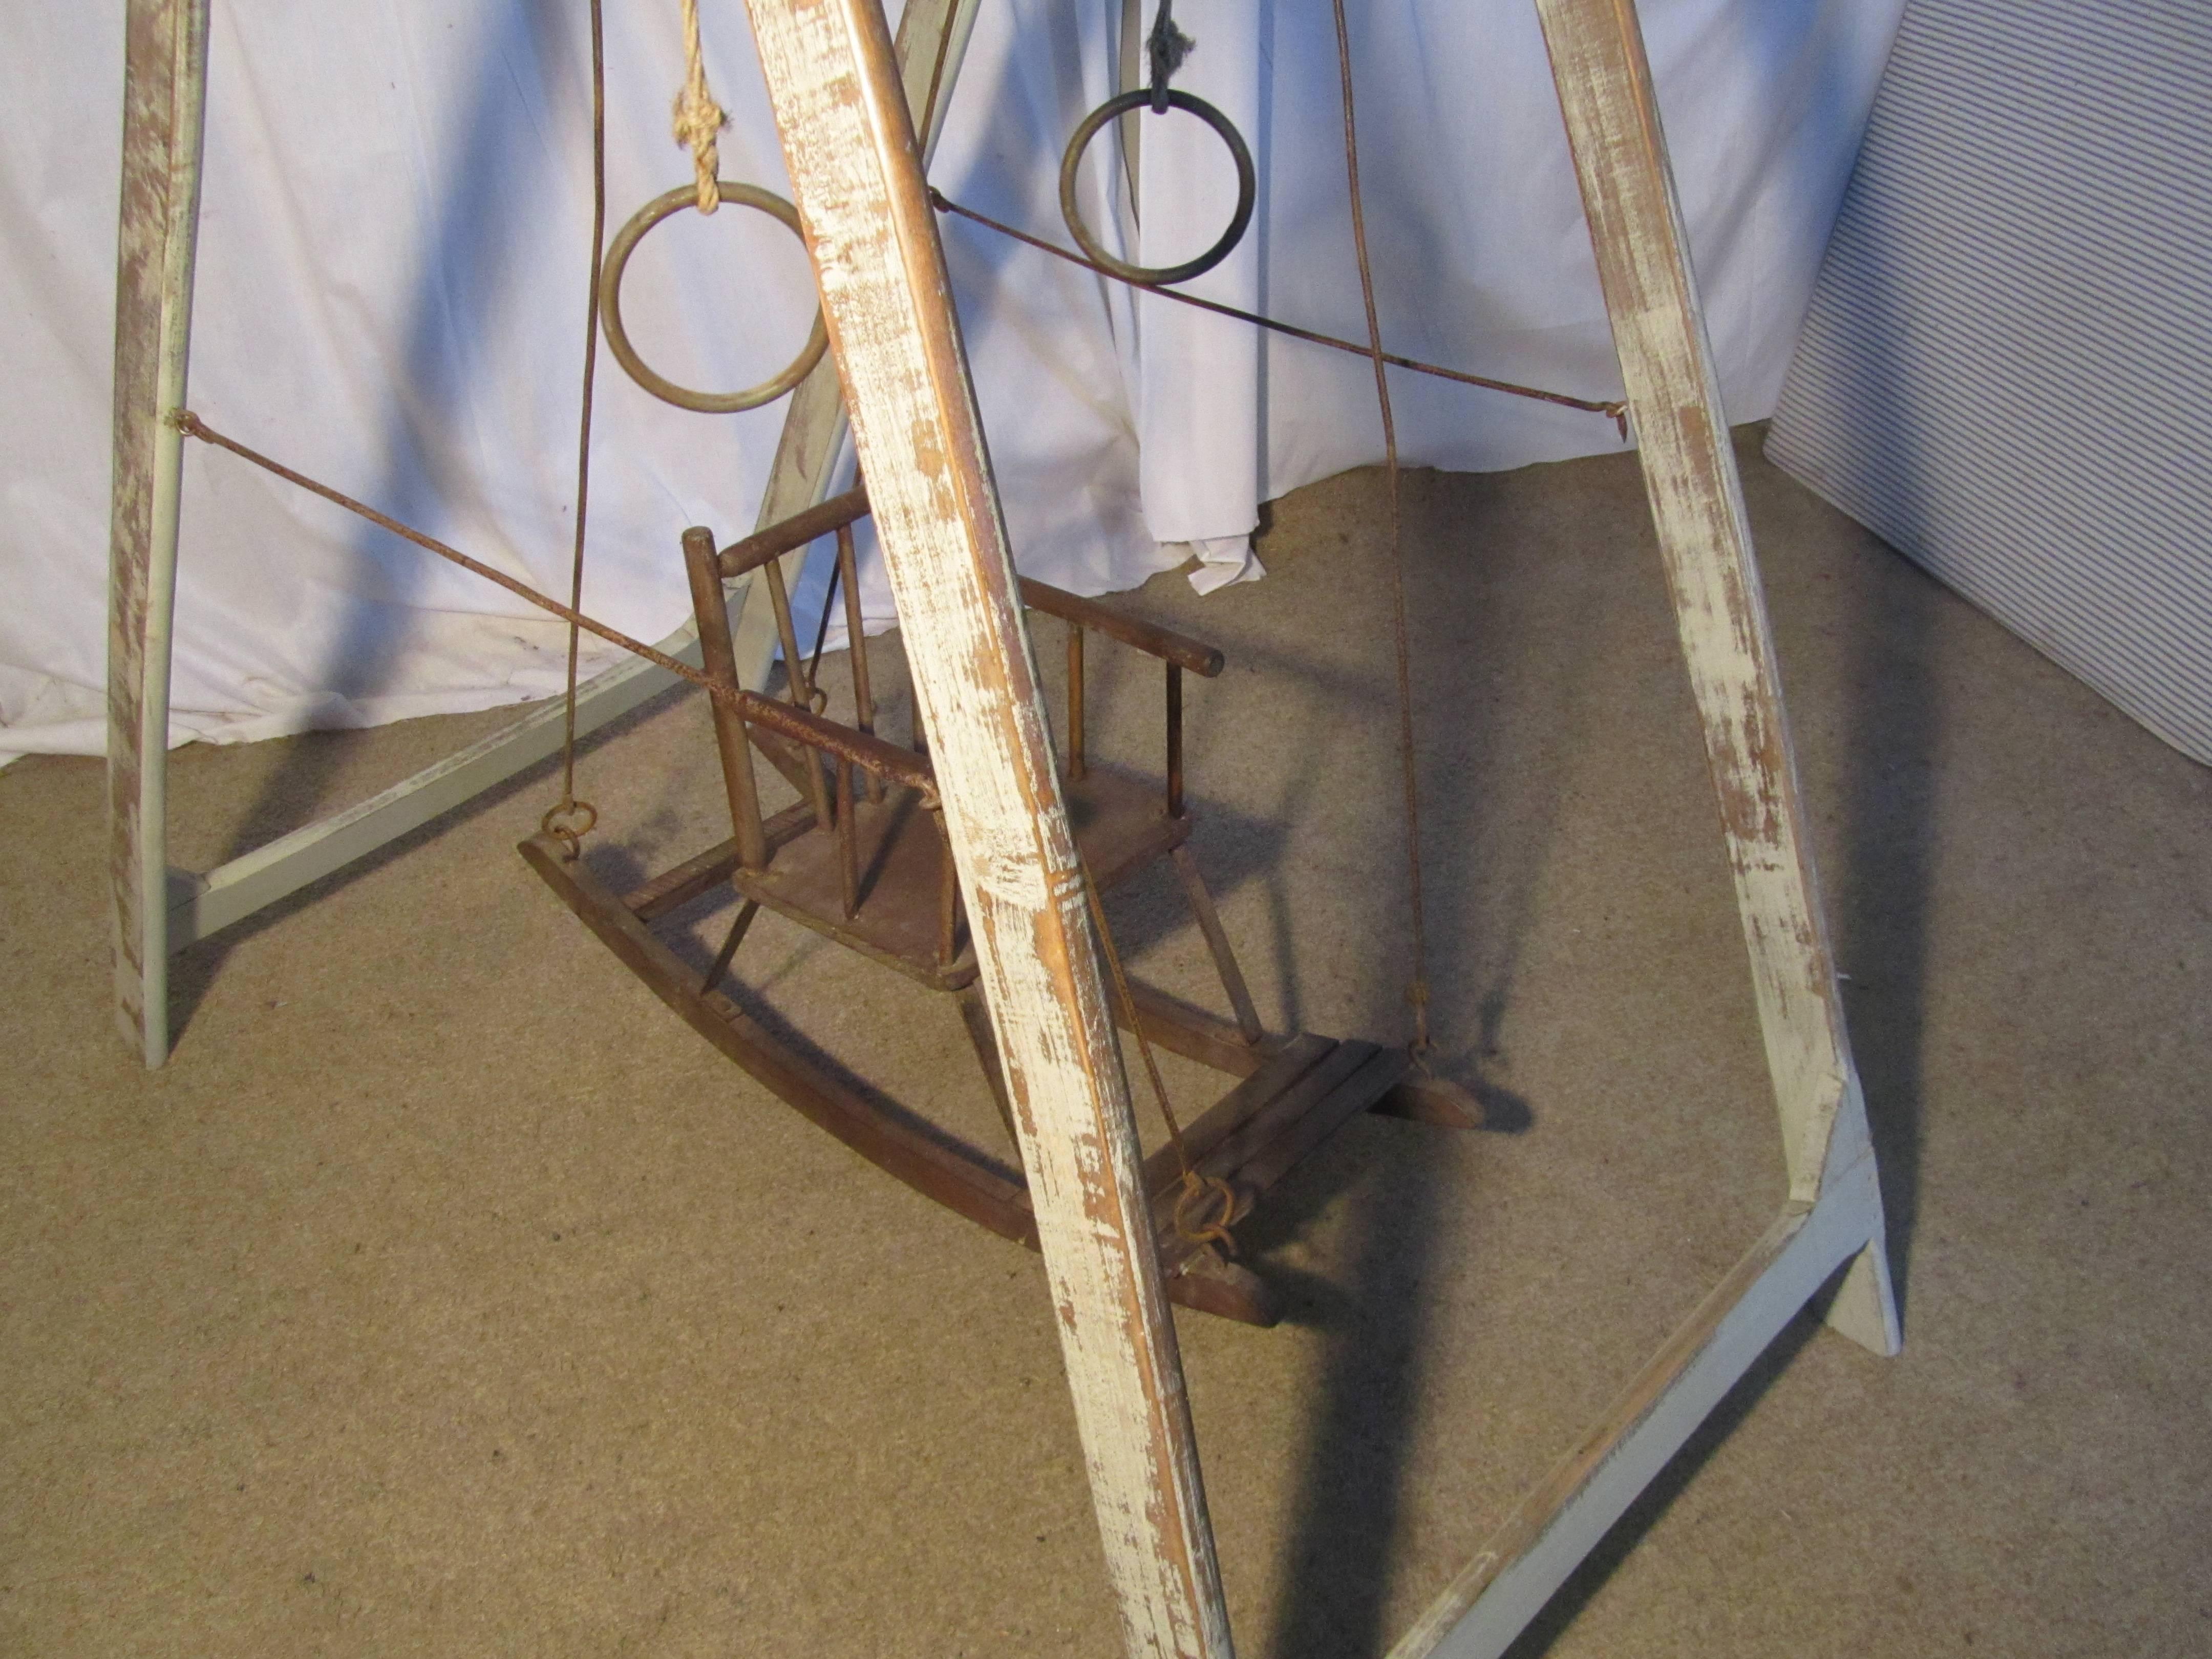 This is a very rare piece, it comes from a Nursery in France, the Wooden frame of the swing folds flat, when opened the swing seat can be hung on the Iron Stays, and the occupier of the seat can push his or herself using the iron rings to swing to